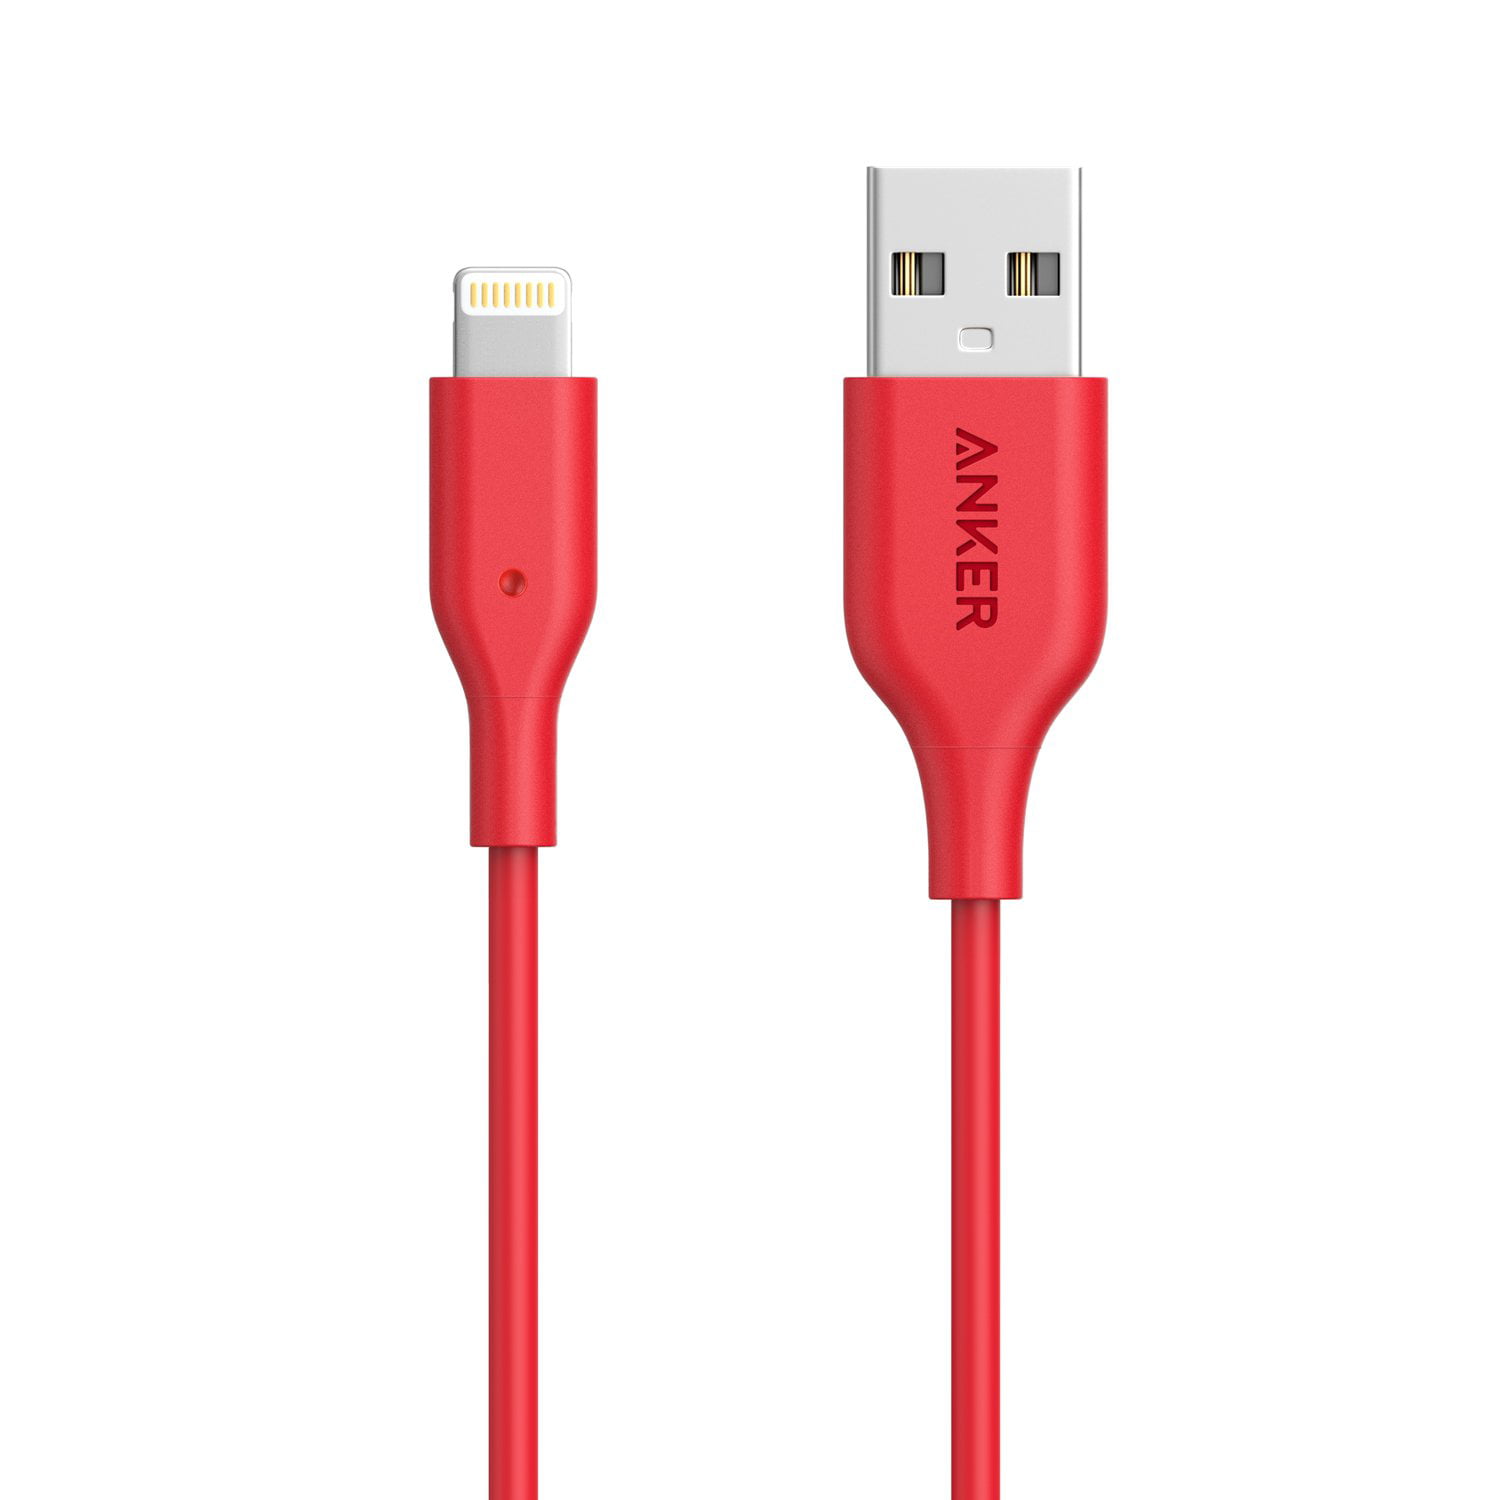 2 Pack Cabepow 10 Foot Lightning Cable MFi Certified Fast Charging Cord for Apple iPhone 11/11 Pro /11 Pro Max/XS/XS Max/XR/X/8/8 Plus/7/7 Plus/6/6 Plus/5/SE iPhone Charger 10ft,